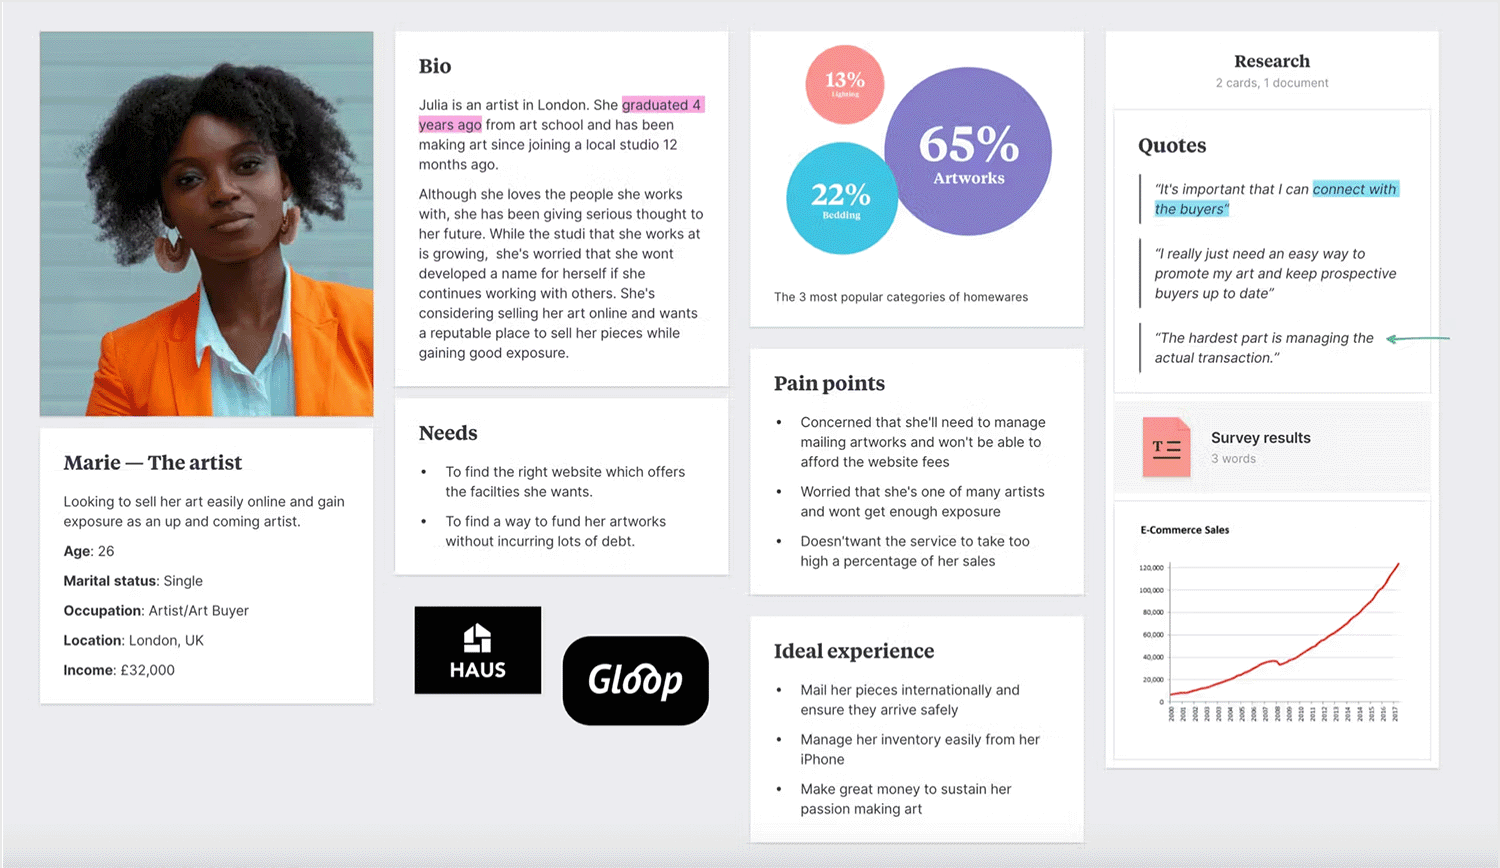 An artist persona template portrays her life as a creative professional in London, aiming to sell her artwork online.